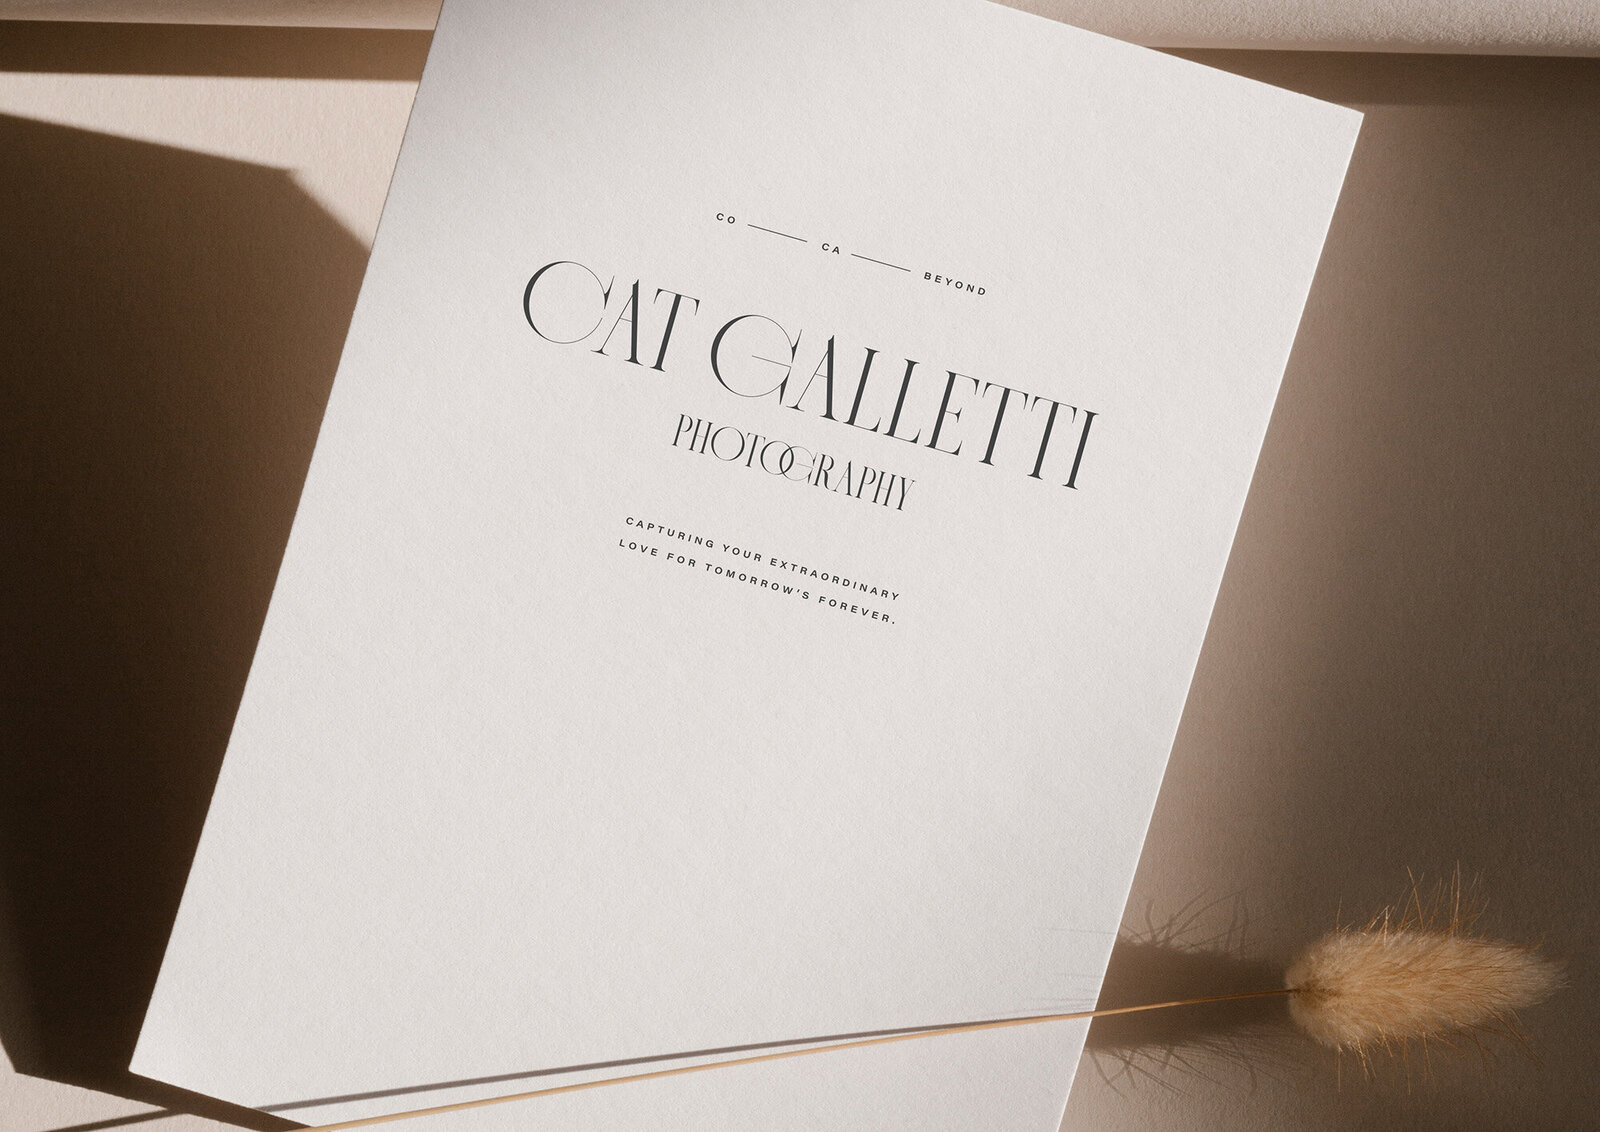 cat-galletti-photography-paper-mockup2